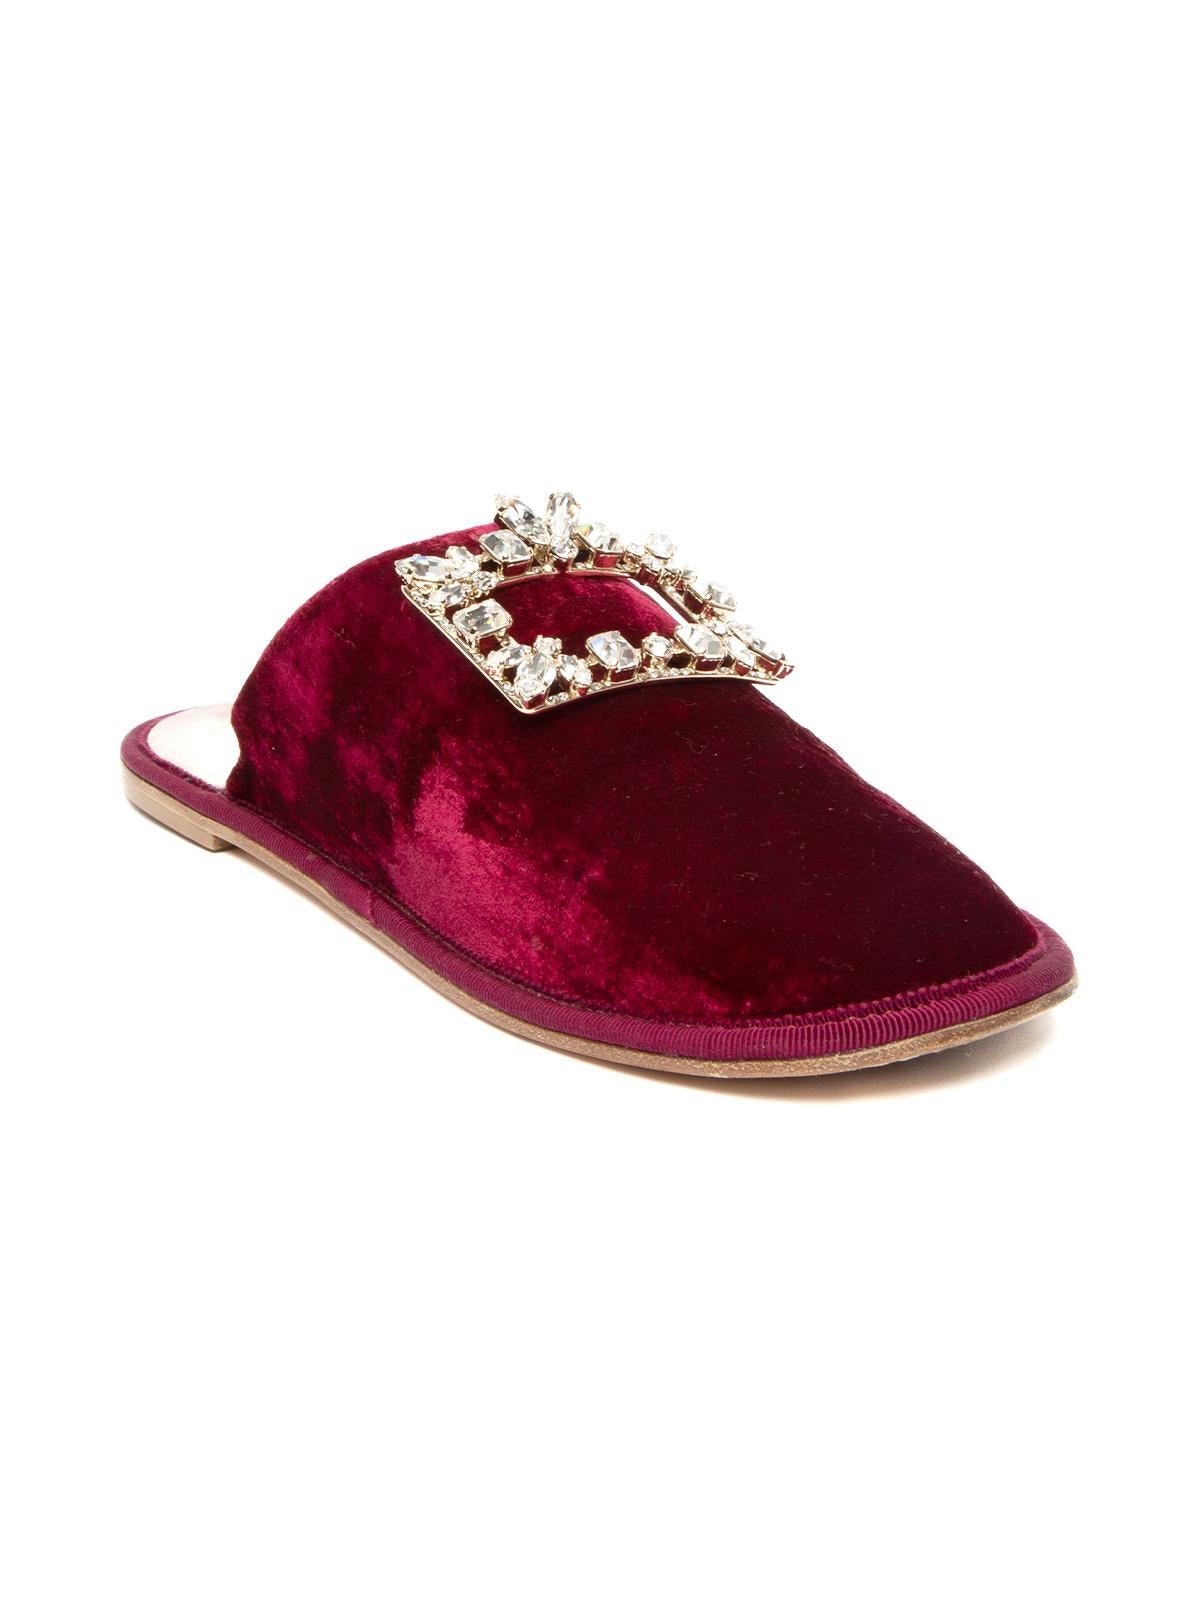 CONDITION is Good. Some wear to shoes is evident. Moderate signs of wear to soles and a minor stain on the inside of the right shoe on this used Roger Vivier designer resale item. Details Burgundy Mules style Velvet Round toe Square embellishment on